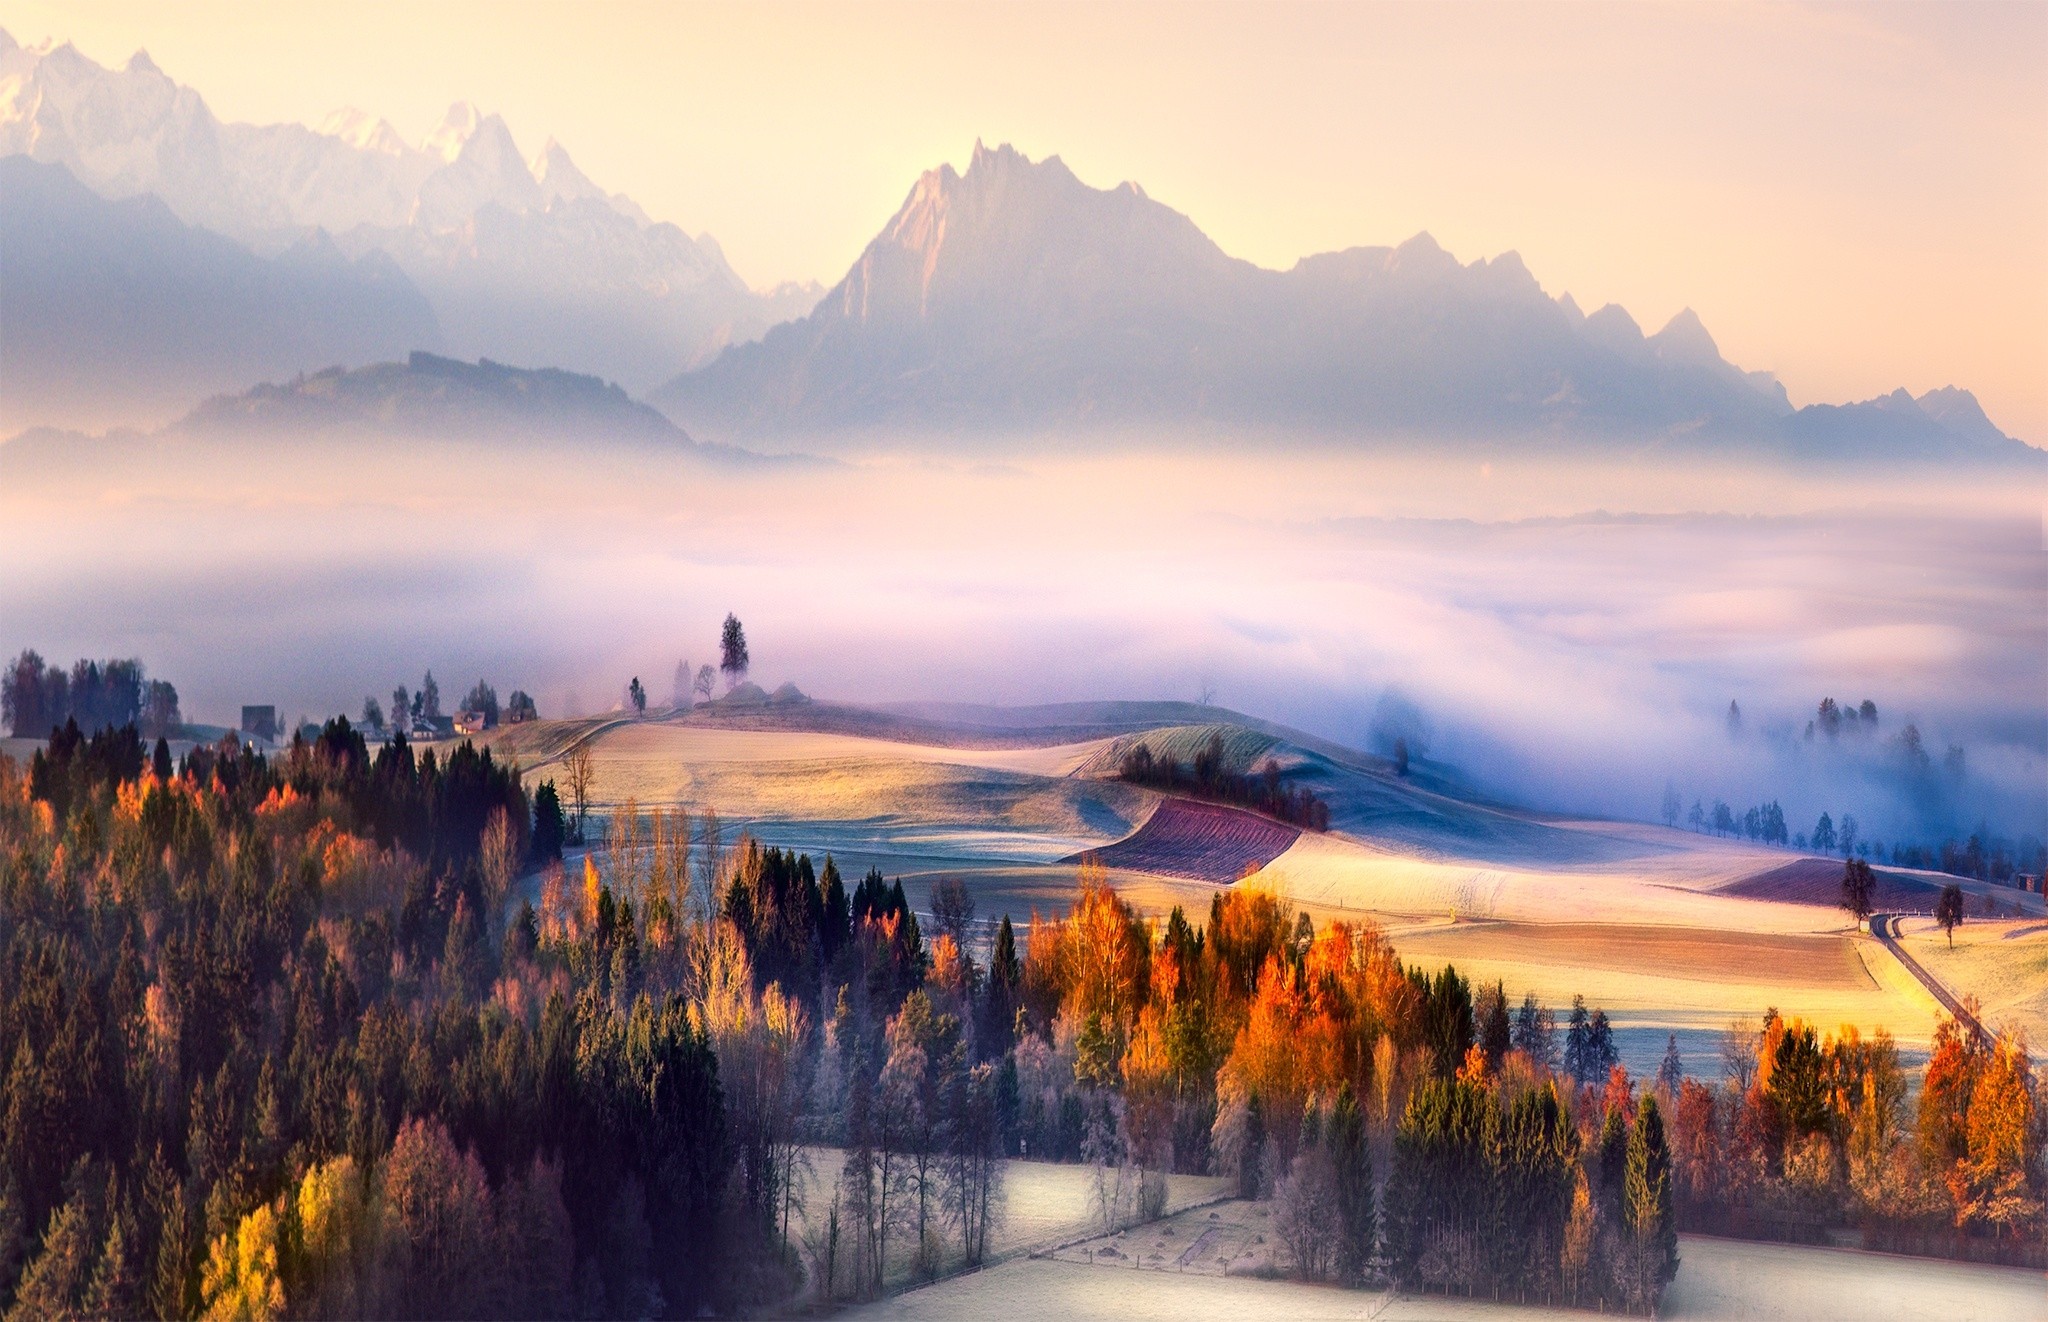 General 2048x1322 fall morning mist Switzerland mountains forest valley nature landscape